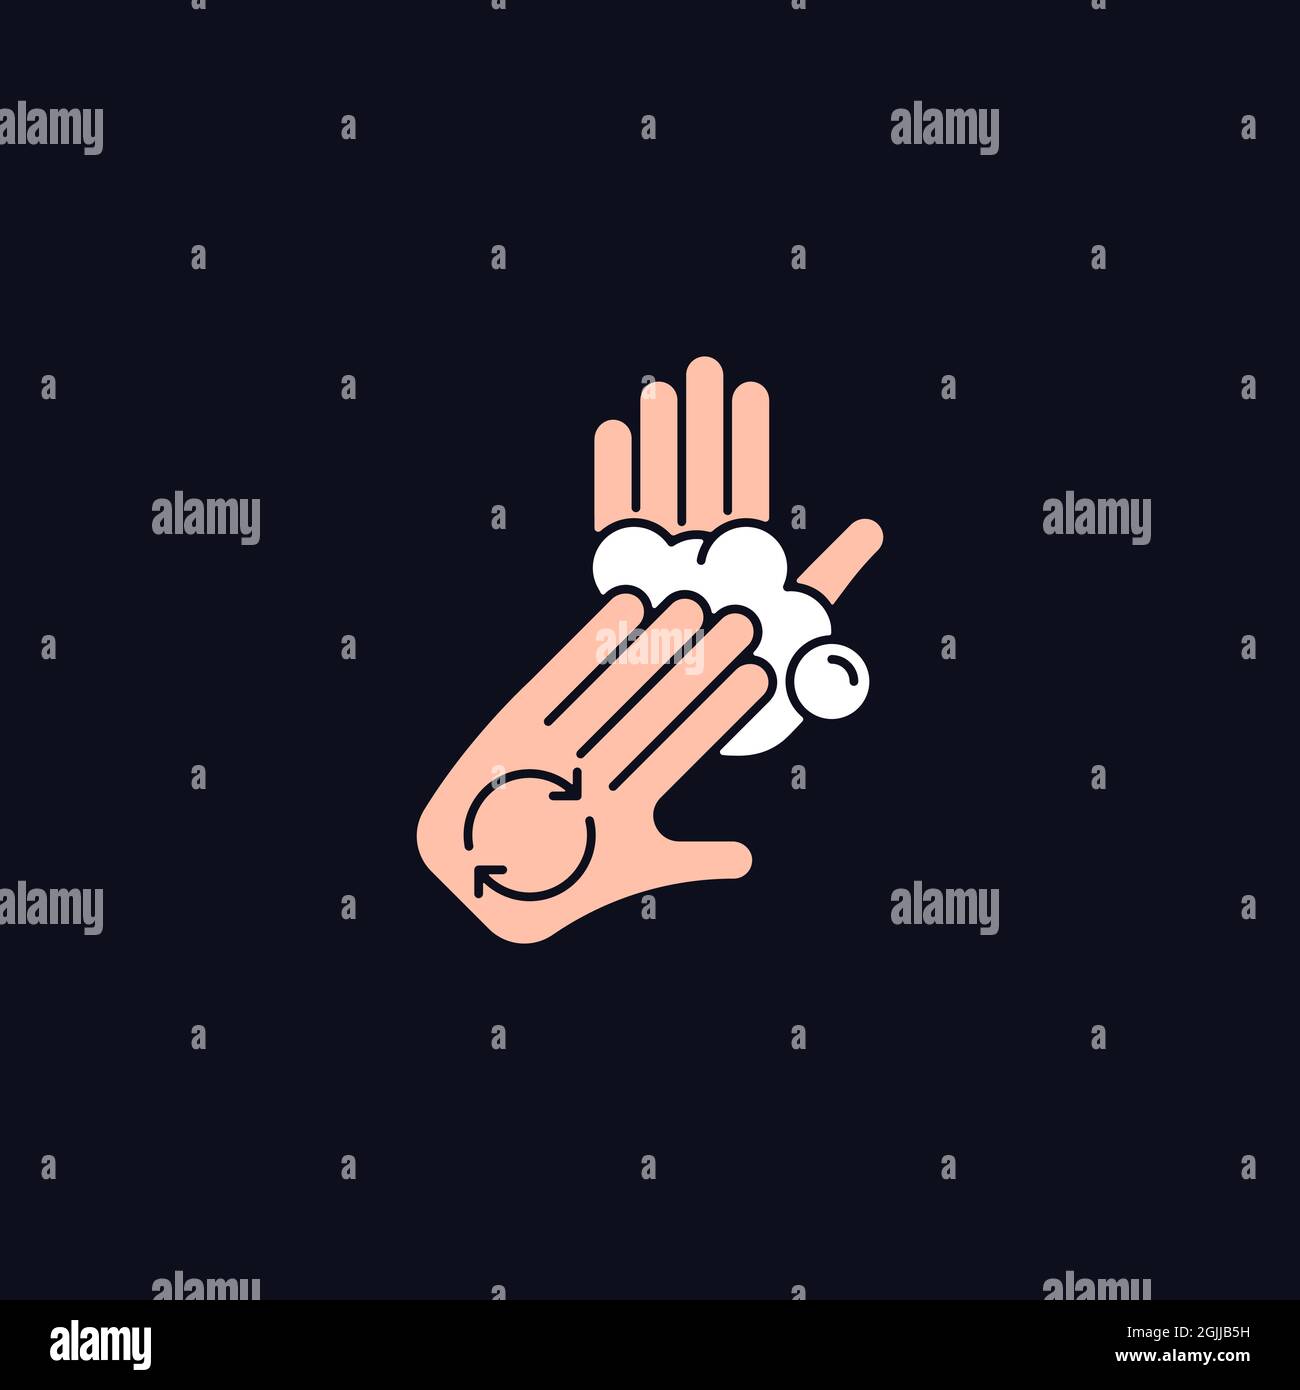 Rub palms with fingers RGB color icon for dark theme Stock Vector